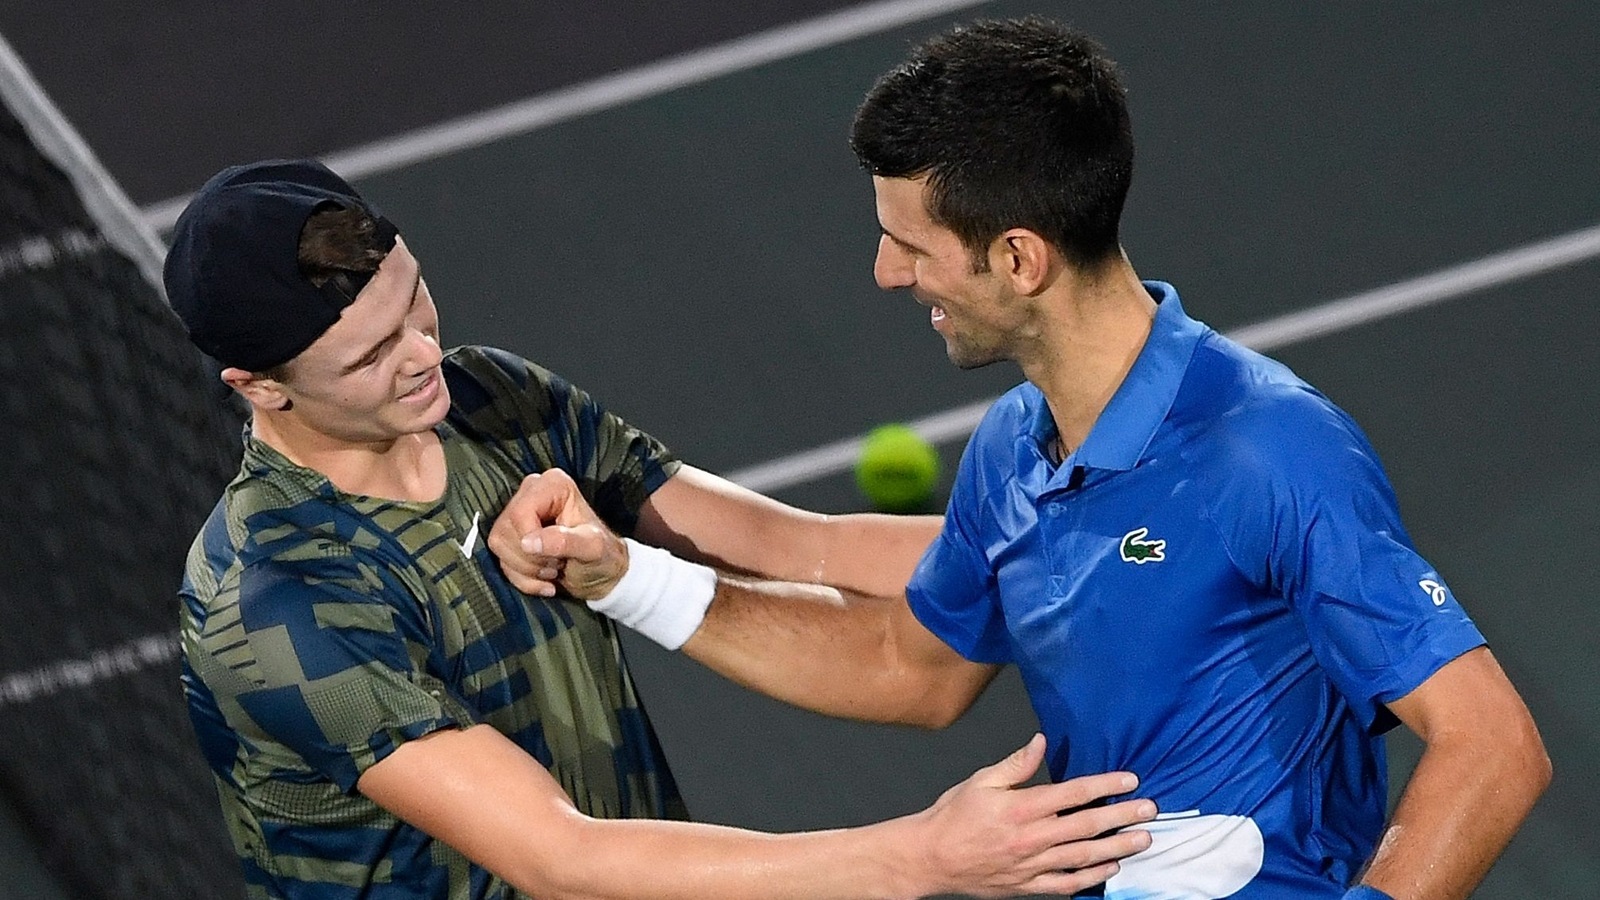 Rune scripts 3 incredible records with Djokovic win to claim Paris Masters title Tennis News